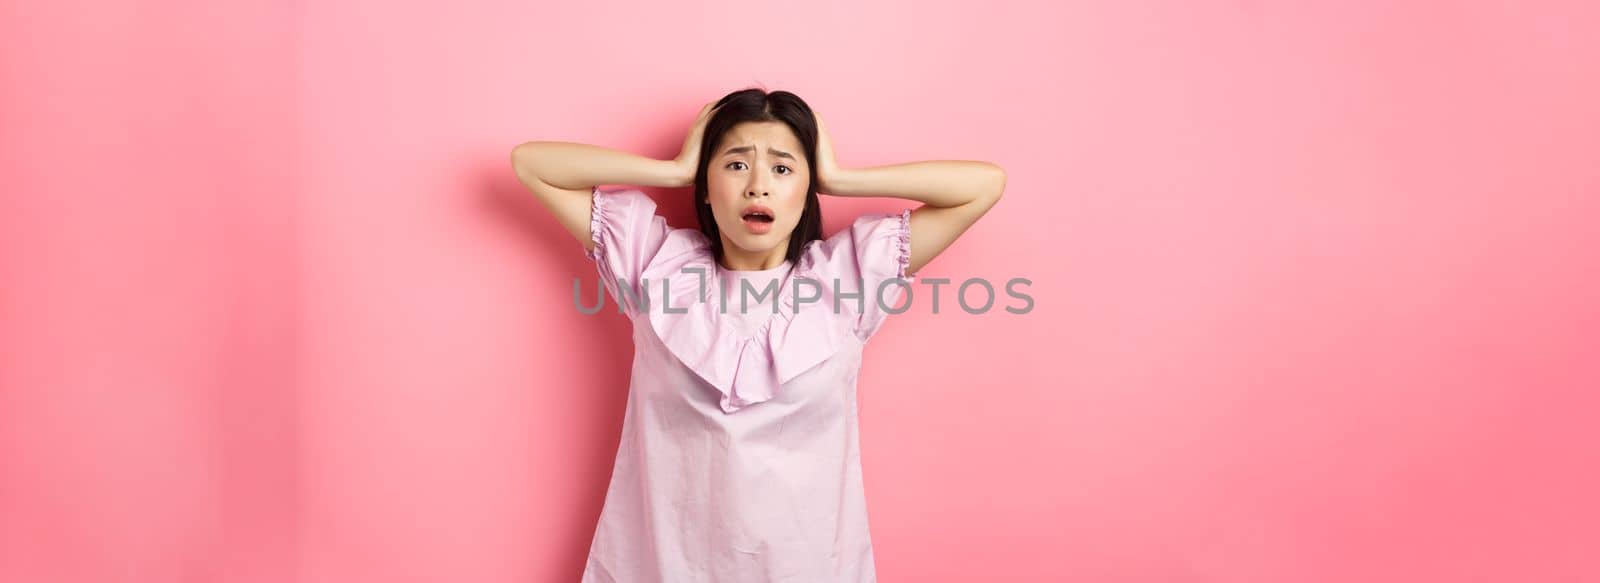 Frustrated asian teen girl panicking, holding hands on head and screaming scared, standing anxious on pink background.